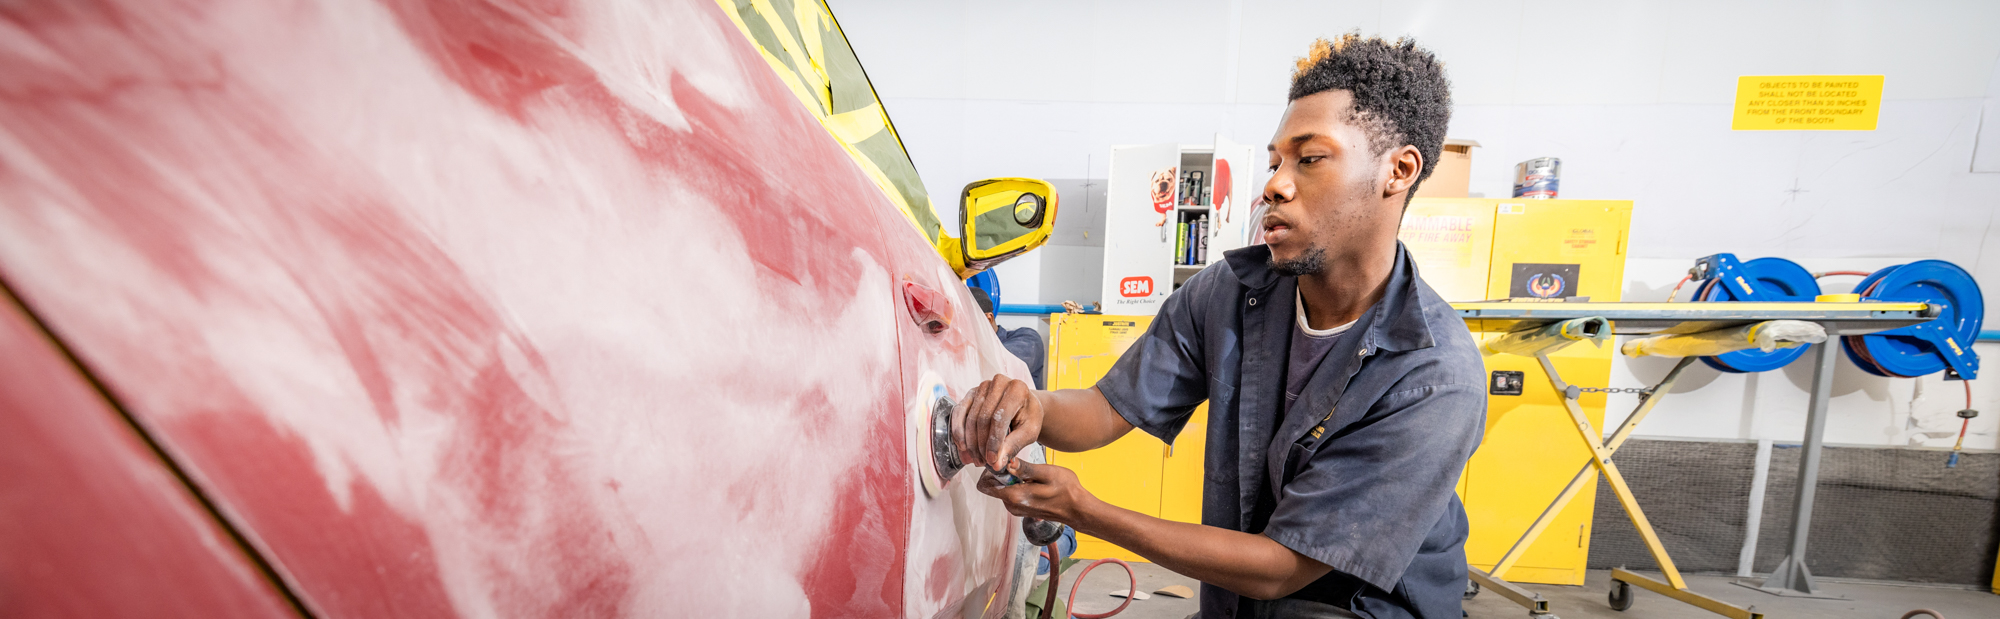 FDTC autobody repair student works on repairing a car in the paint shop